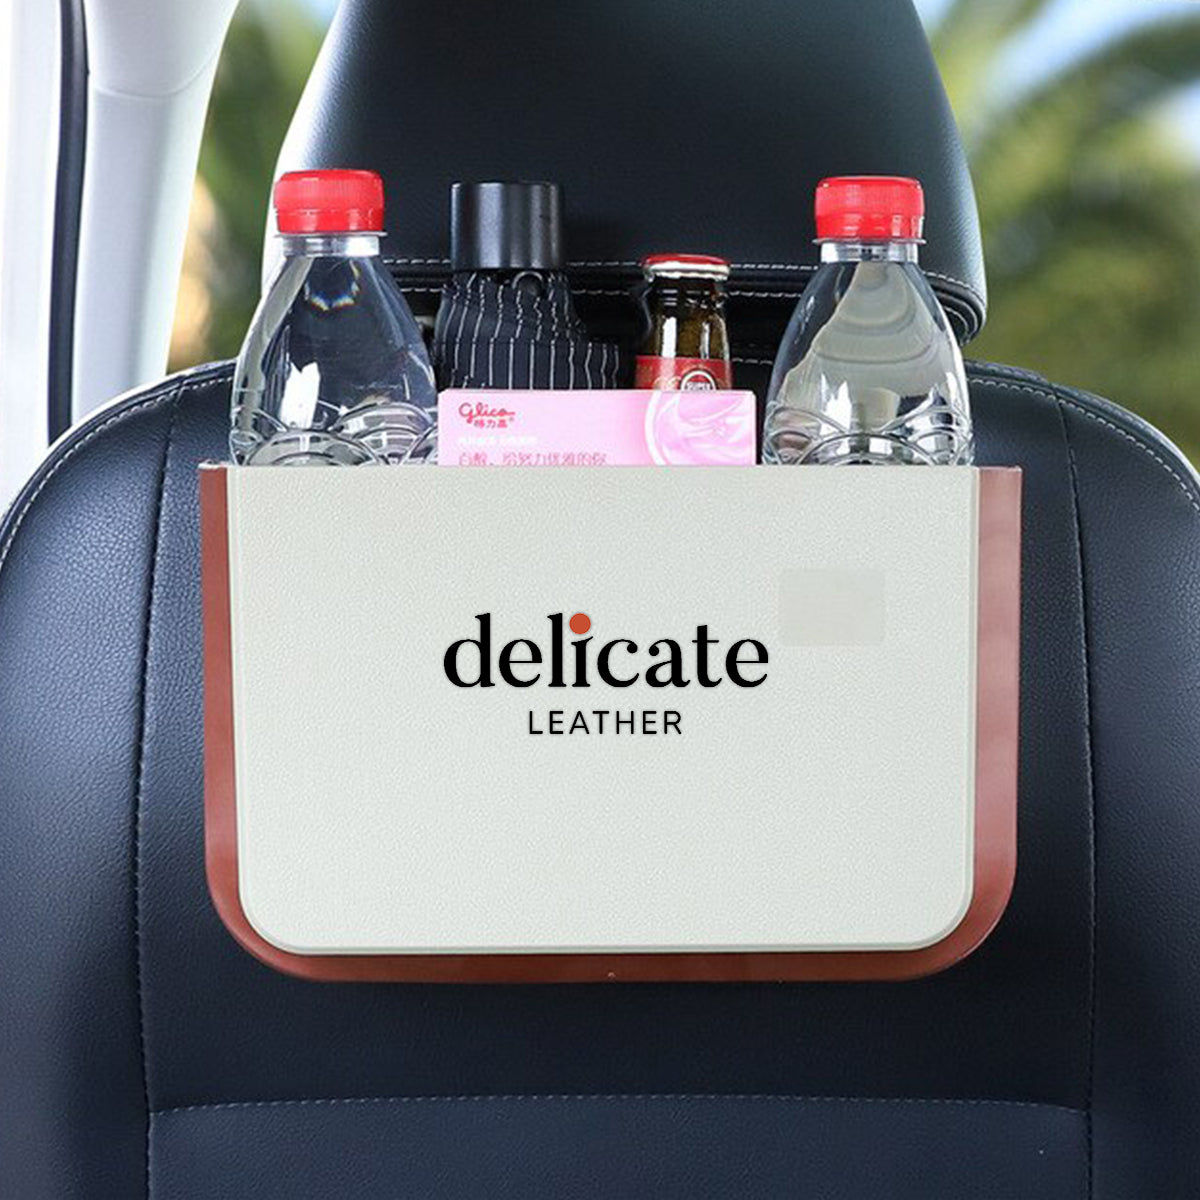 Delicate Leather Hanging Waterproof Car Trash can-Foldable, Custom For Your Cars, Waterproof, and Equipped with Cup Holders and Trays. Multi-Purpose, Car Accessories PF11992 - Delicate Leather